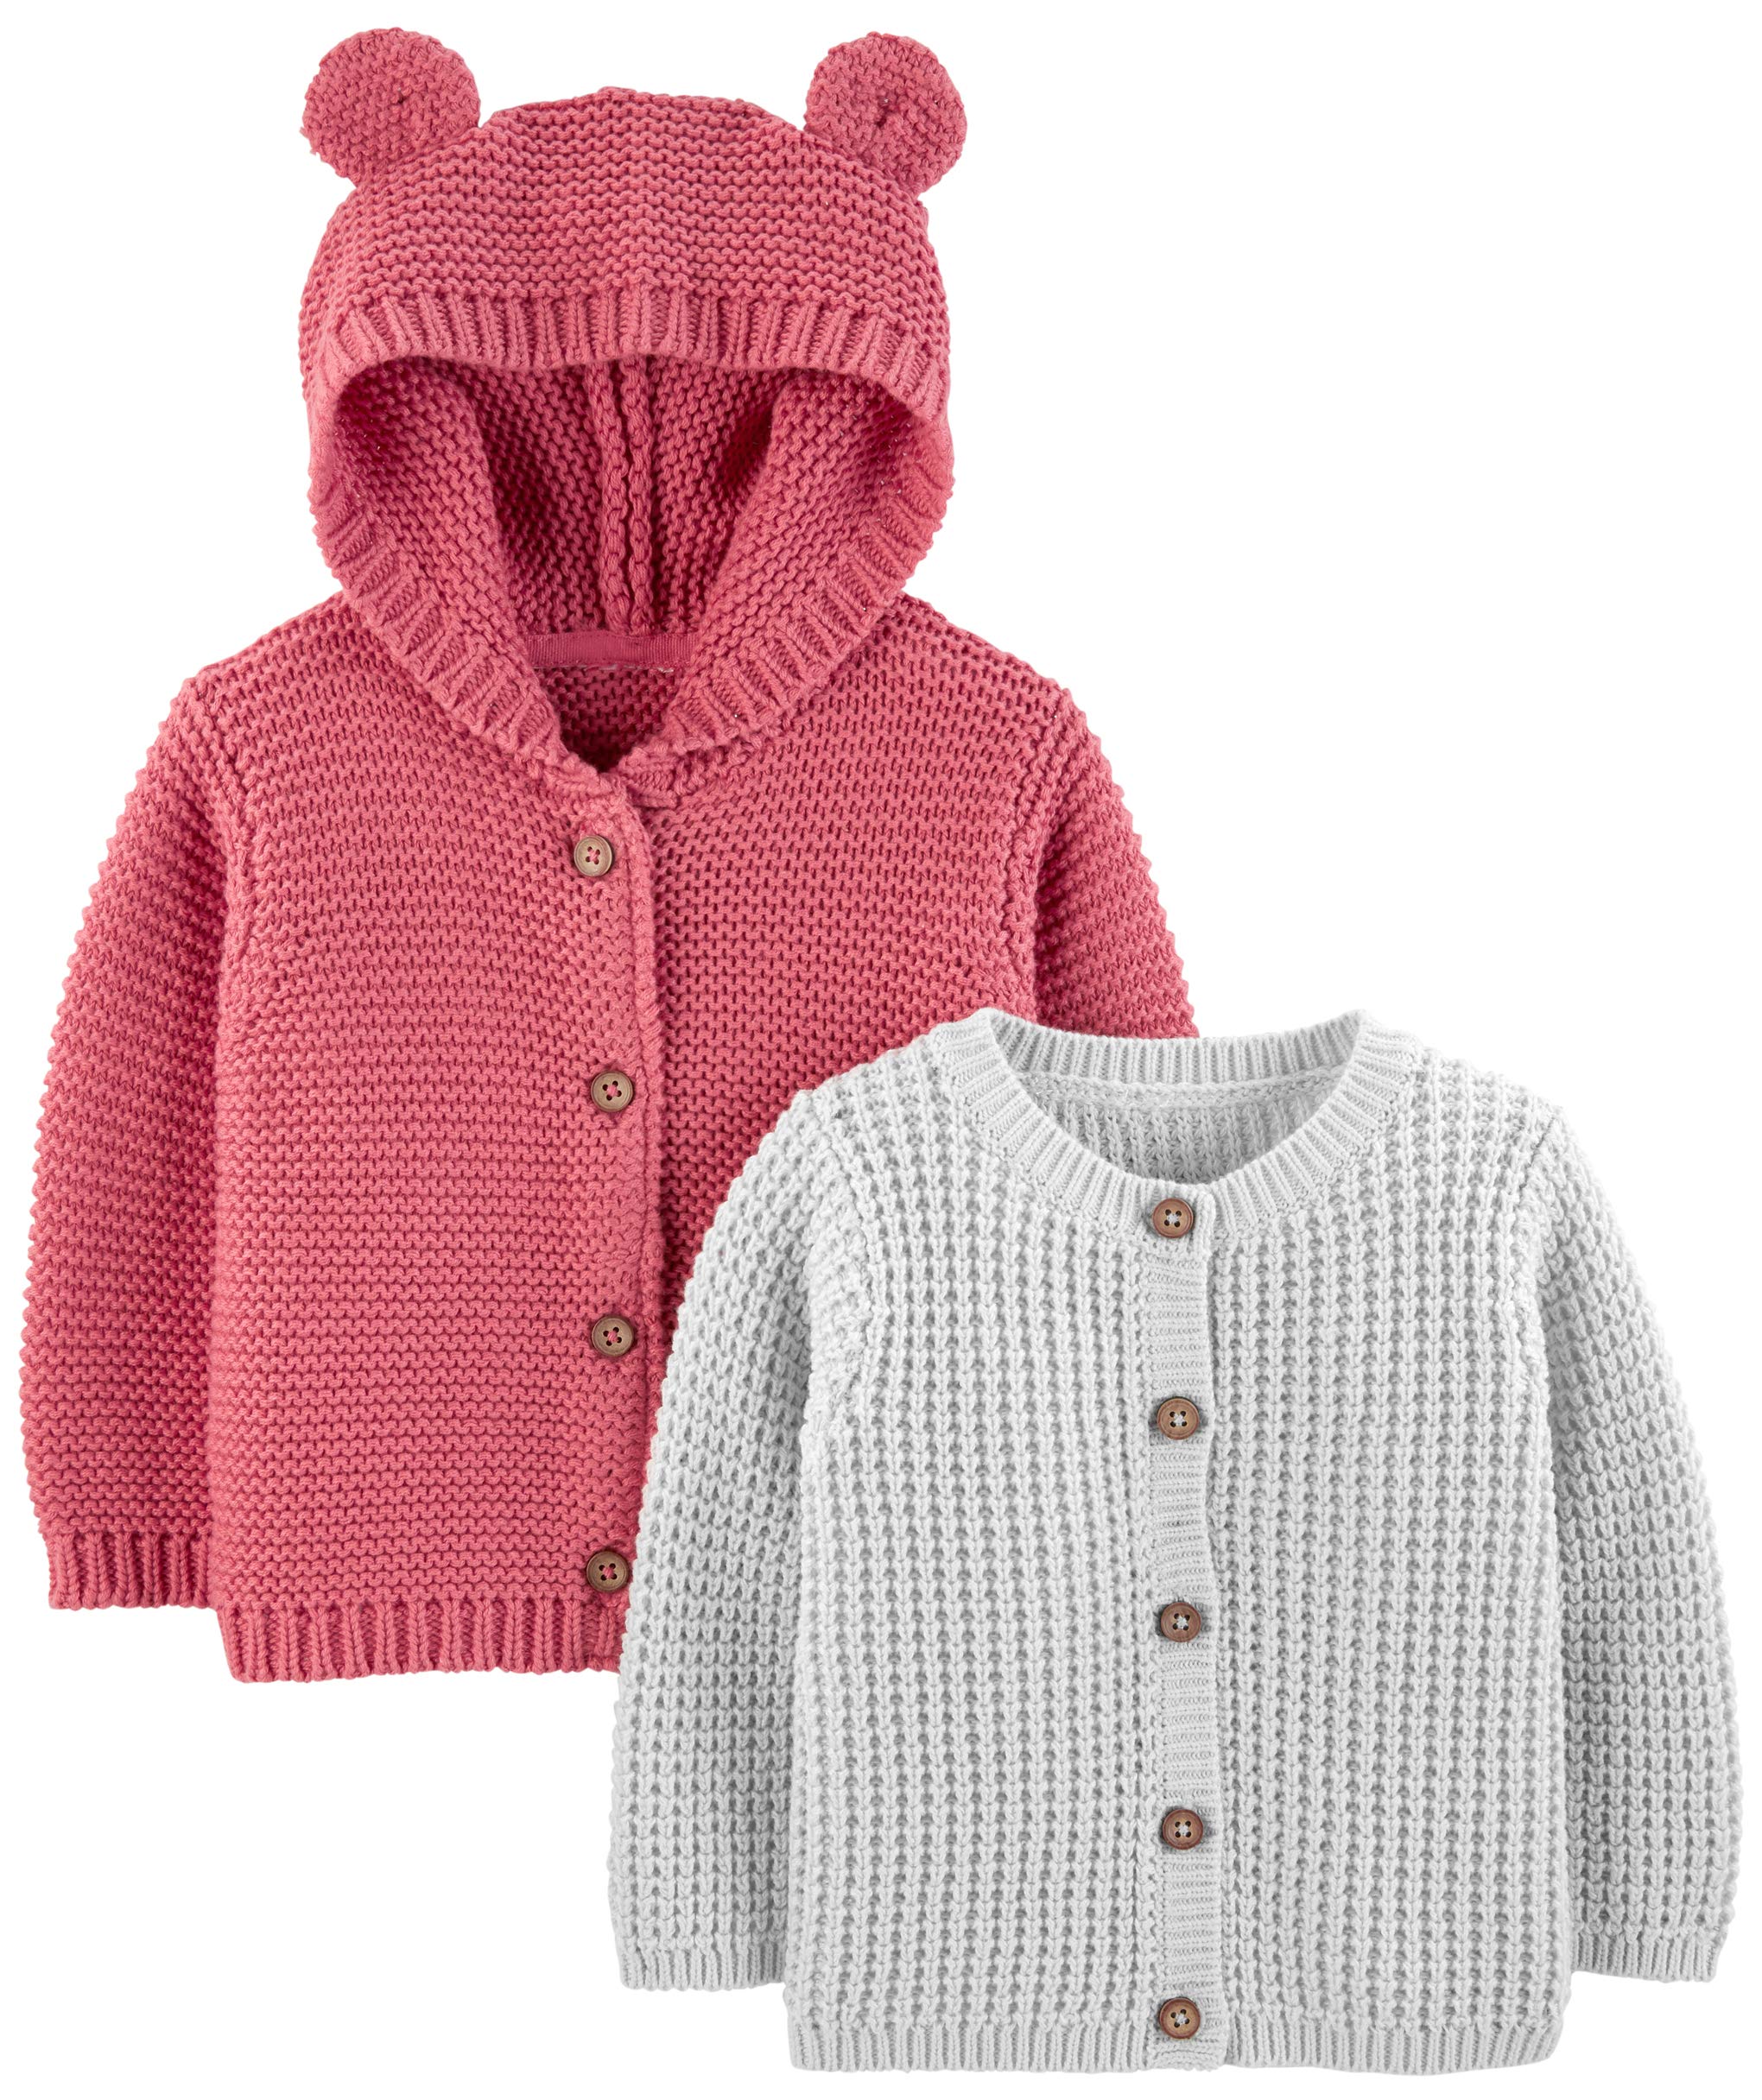 Simple Joys by Carter's Unisex Babies' Knit Cardigan Sweaters, Pack of 2